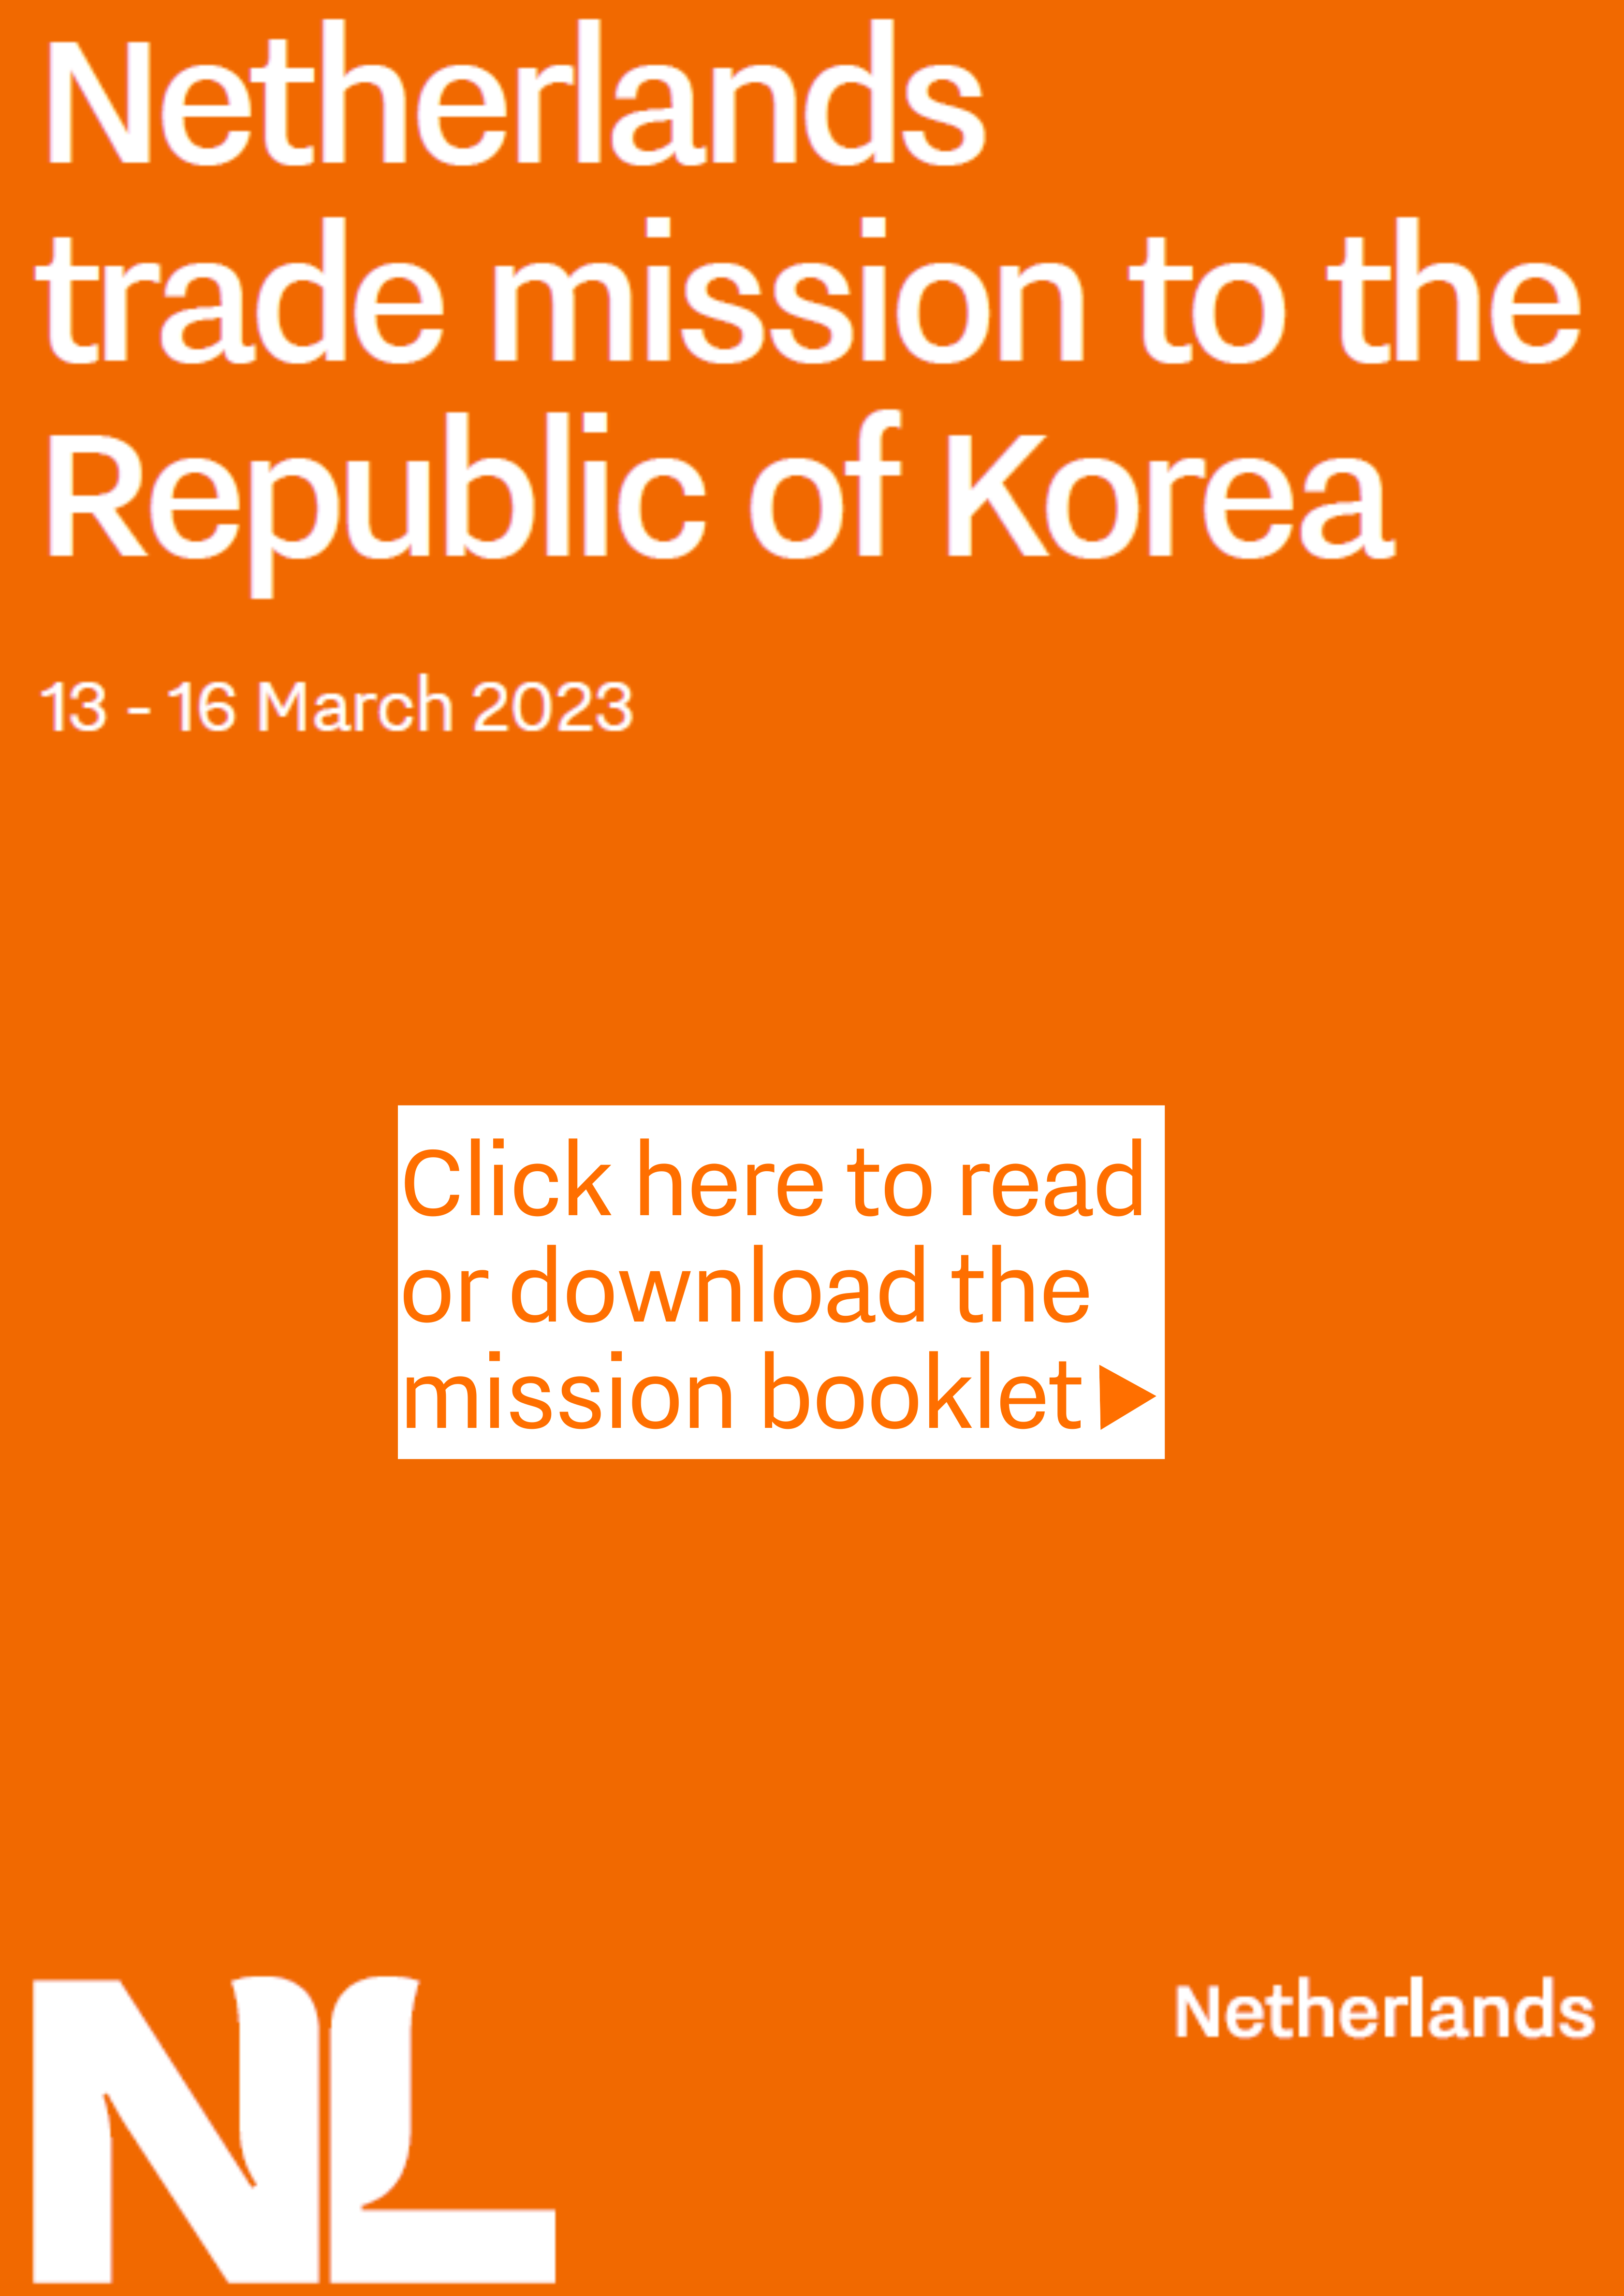 Mission booklet to South Korea